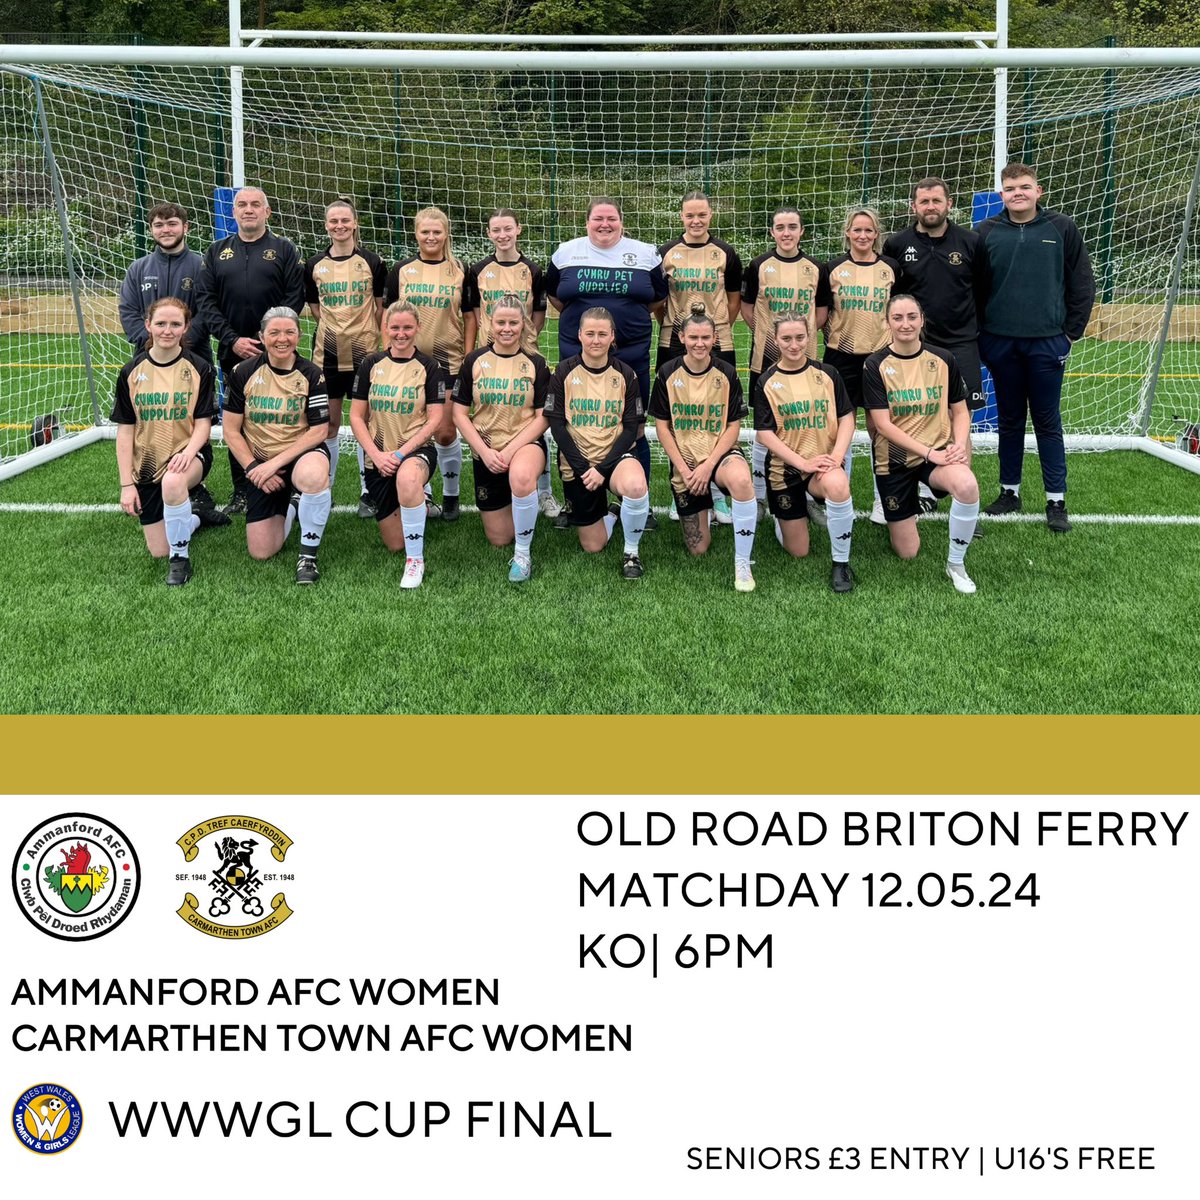 𝗡𝗘𝗫𝗧 𝗚𝗔𝗠𝗘 🏆🎉 🫶 Come and support our women on Sunday in the WWWGL cup final against Ammanford. It’s a must-watch game. ℹ️ Prices: Seniors: £3 U16’s: Free @CTAFCacademy @CarmarthenAFC #UnHenAur | #OneOldGold